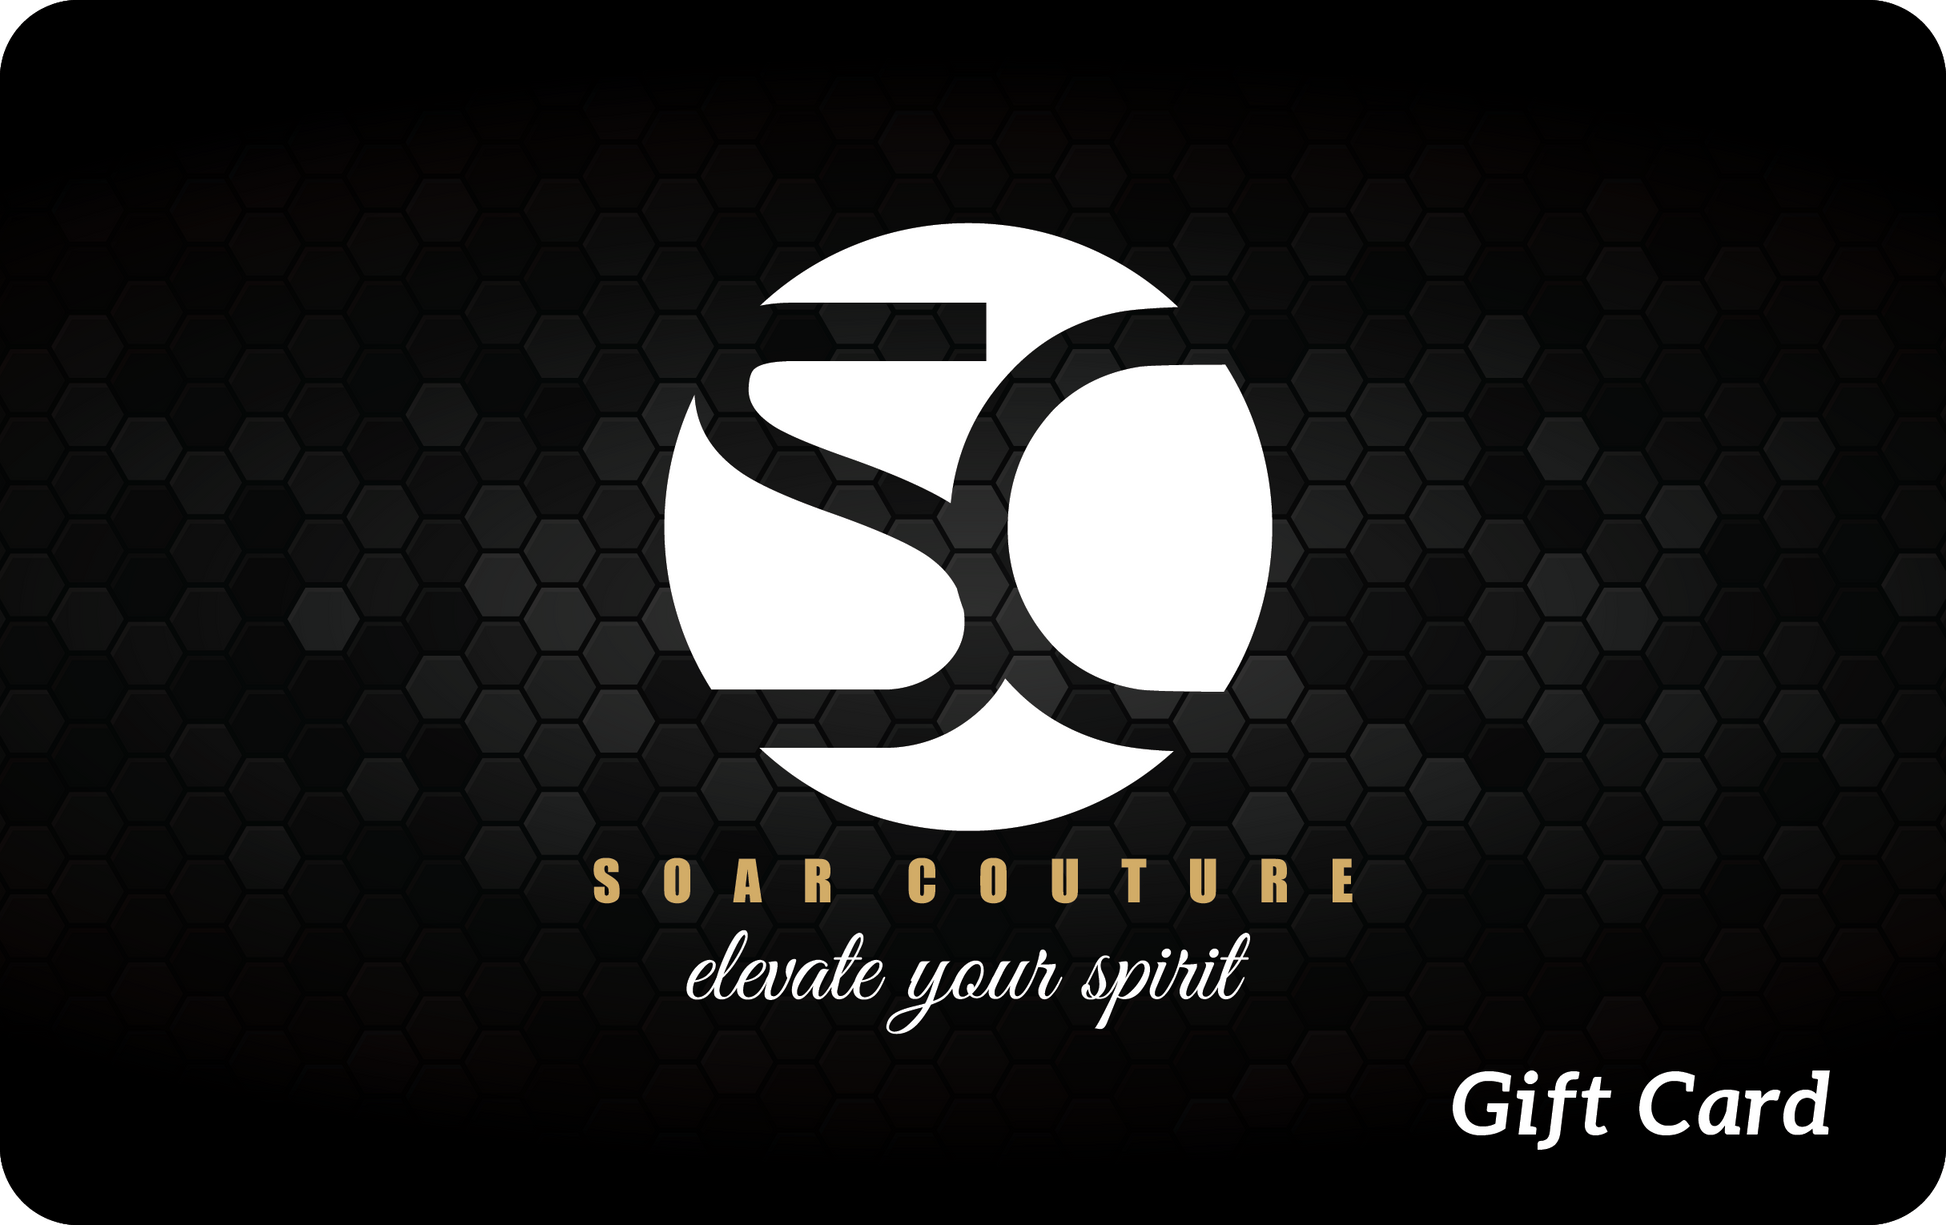 Gift Card 4 - SoarCouture